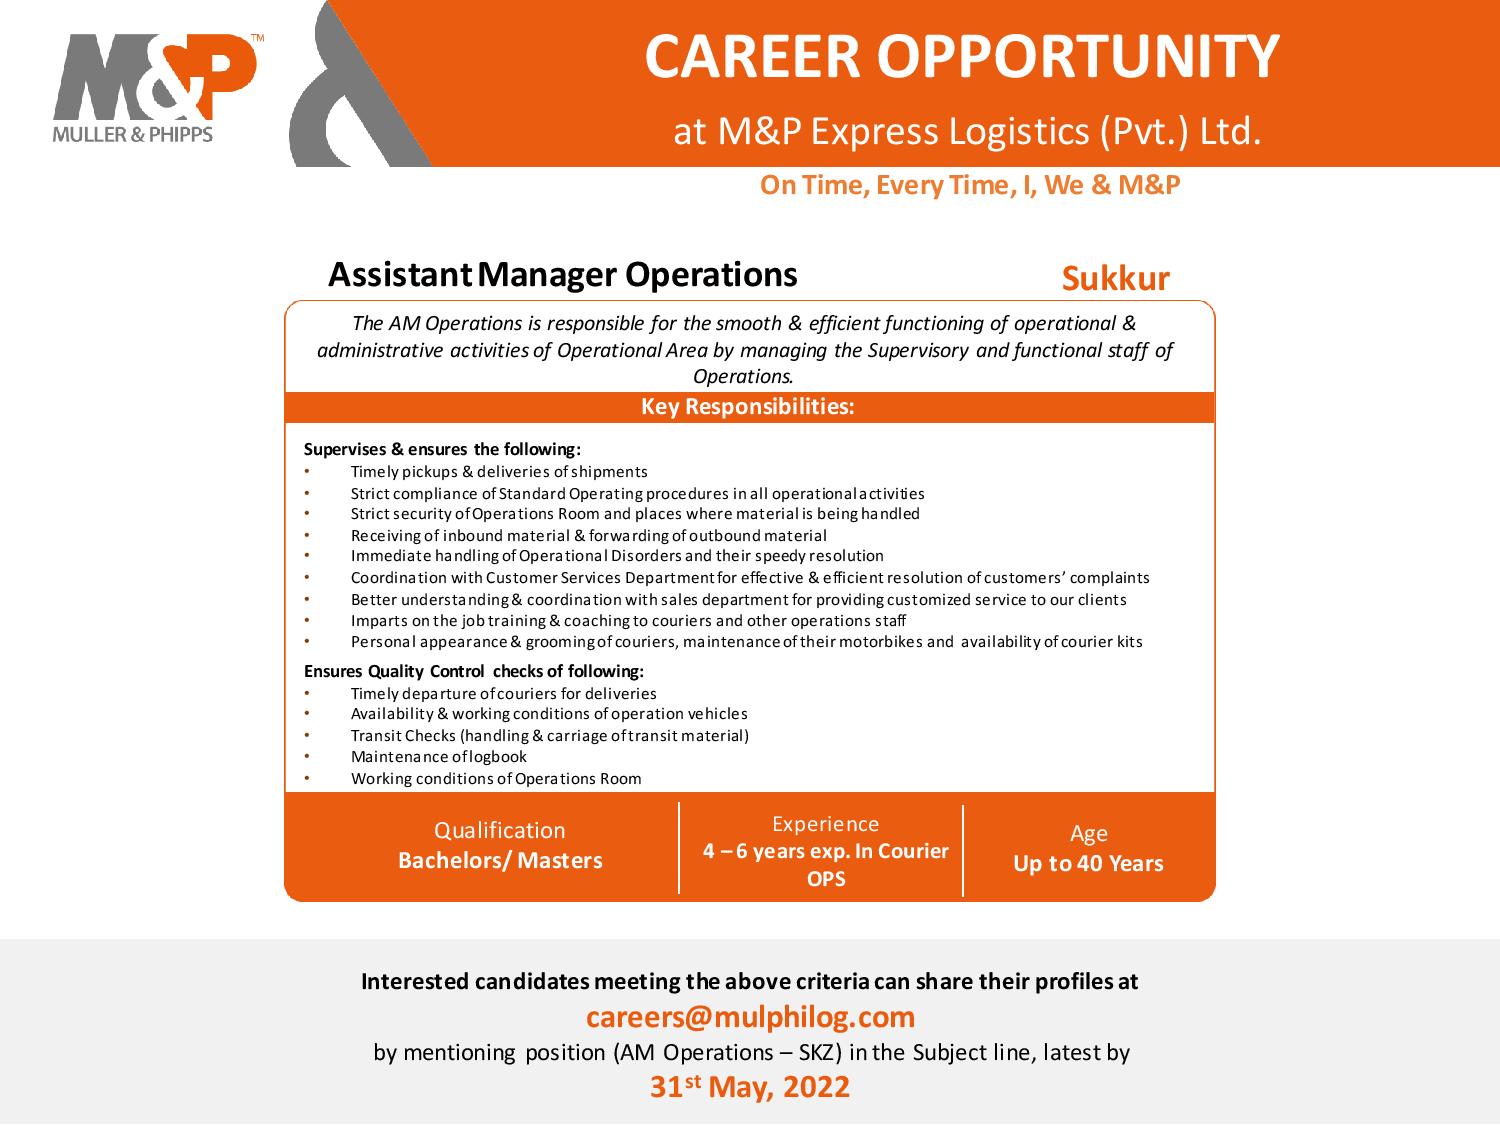 Assistant Manager Operations opportunity at M&P Express Logistics